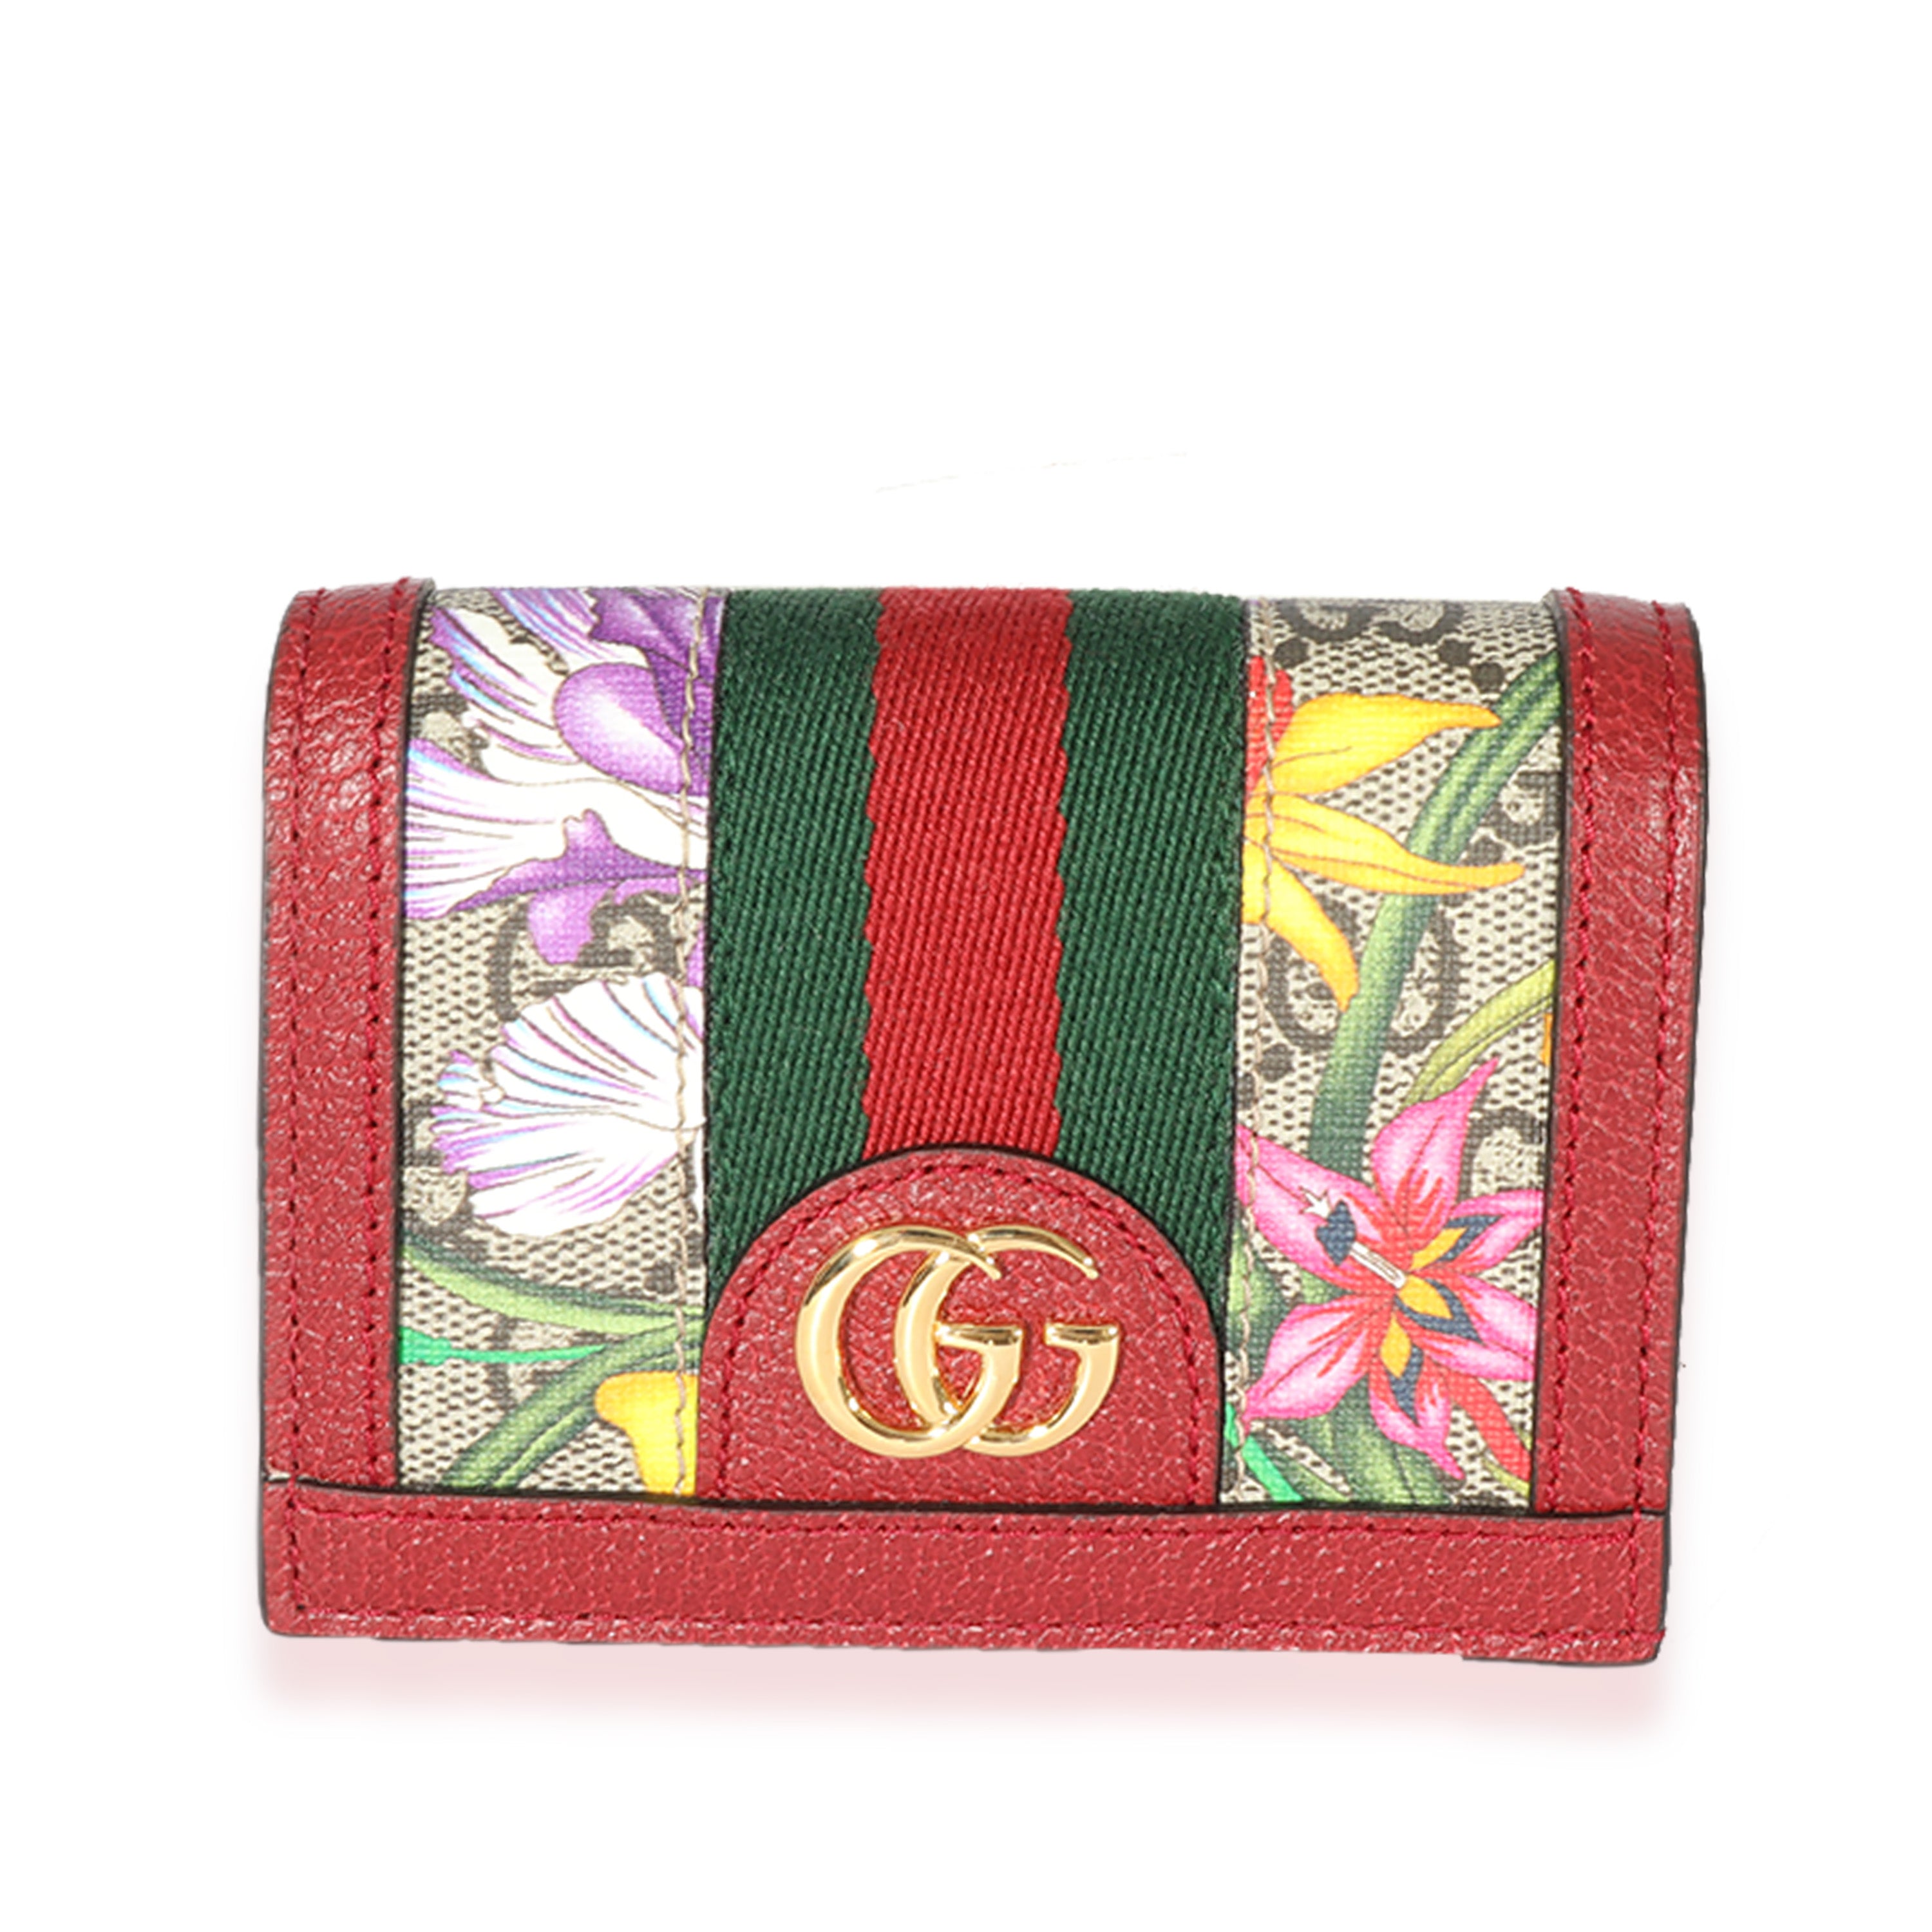 Guide to Buying Used Authentic Gucci Bags & Accessories